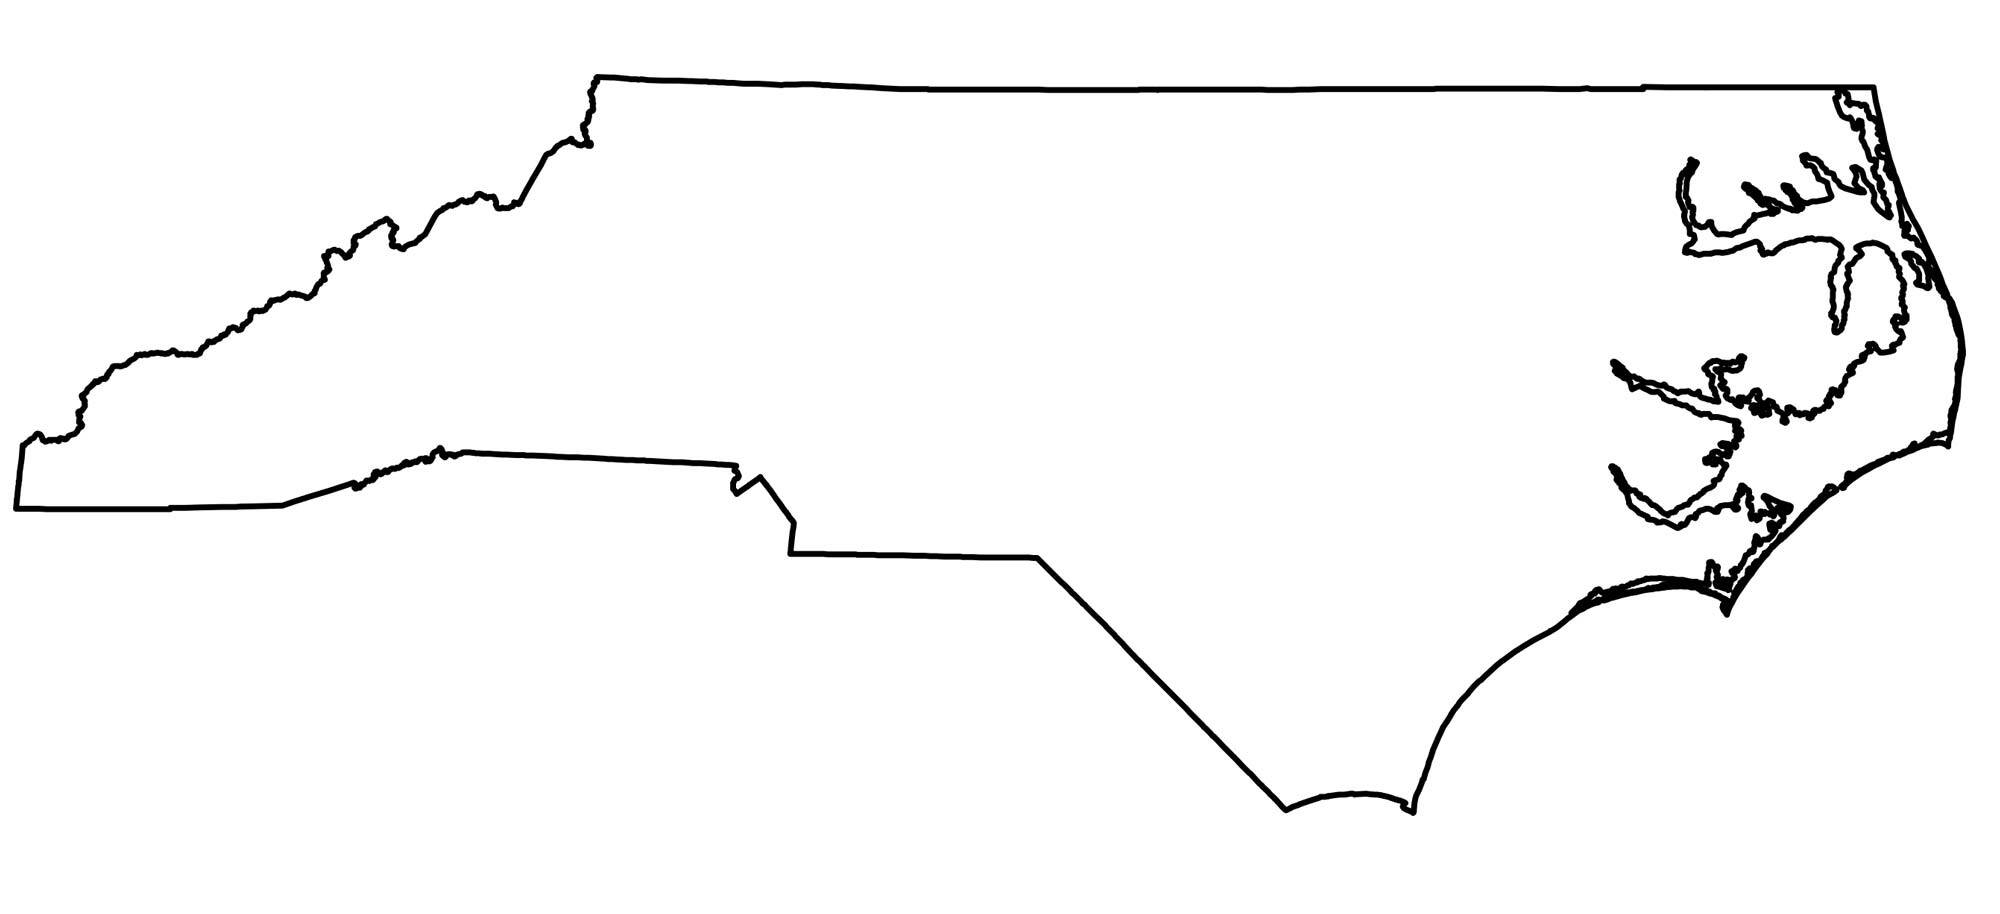 State Outlines Blank Maps Of The 50 United States GIS 